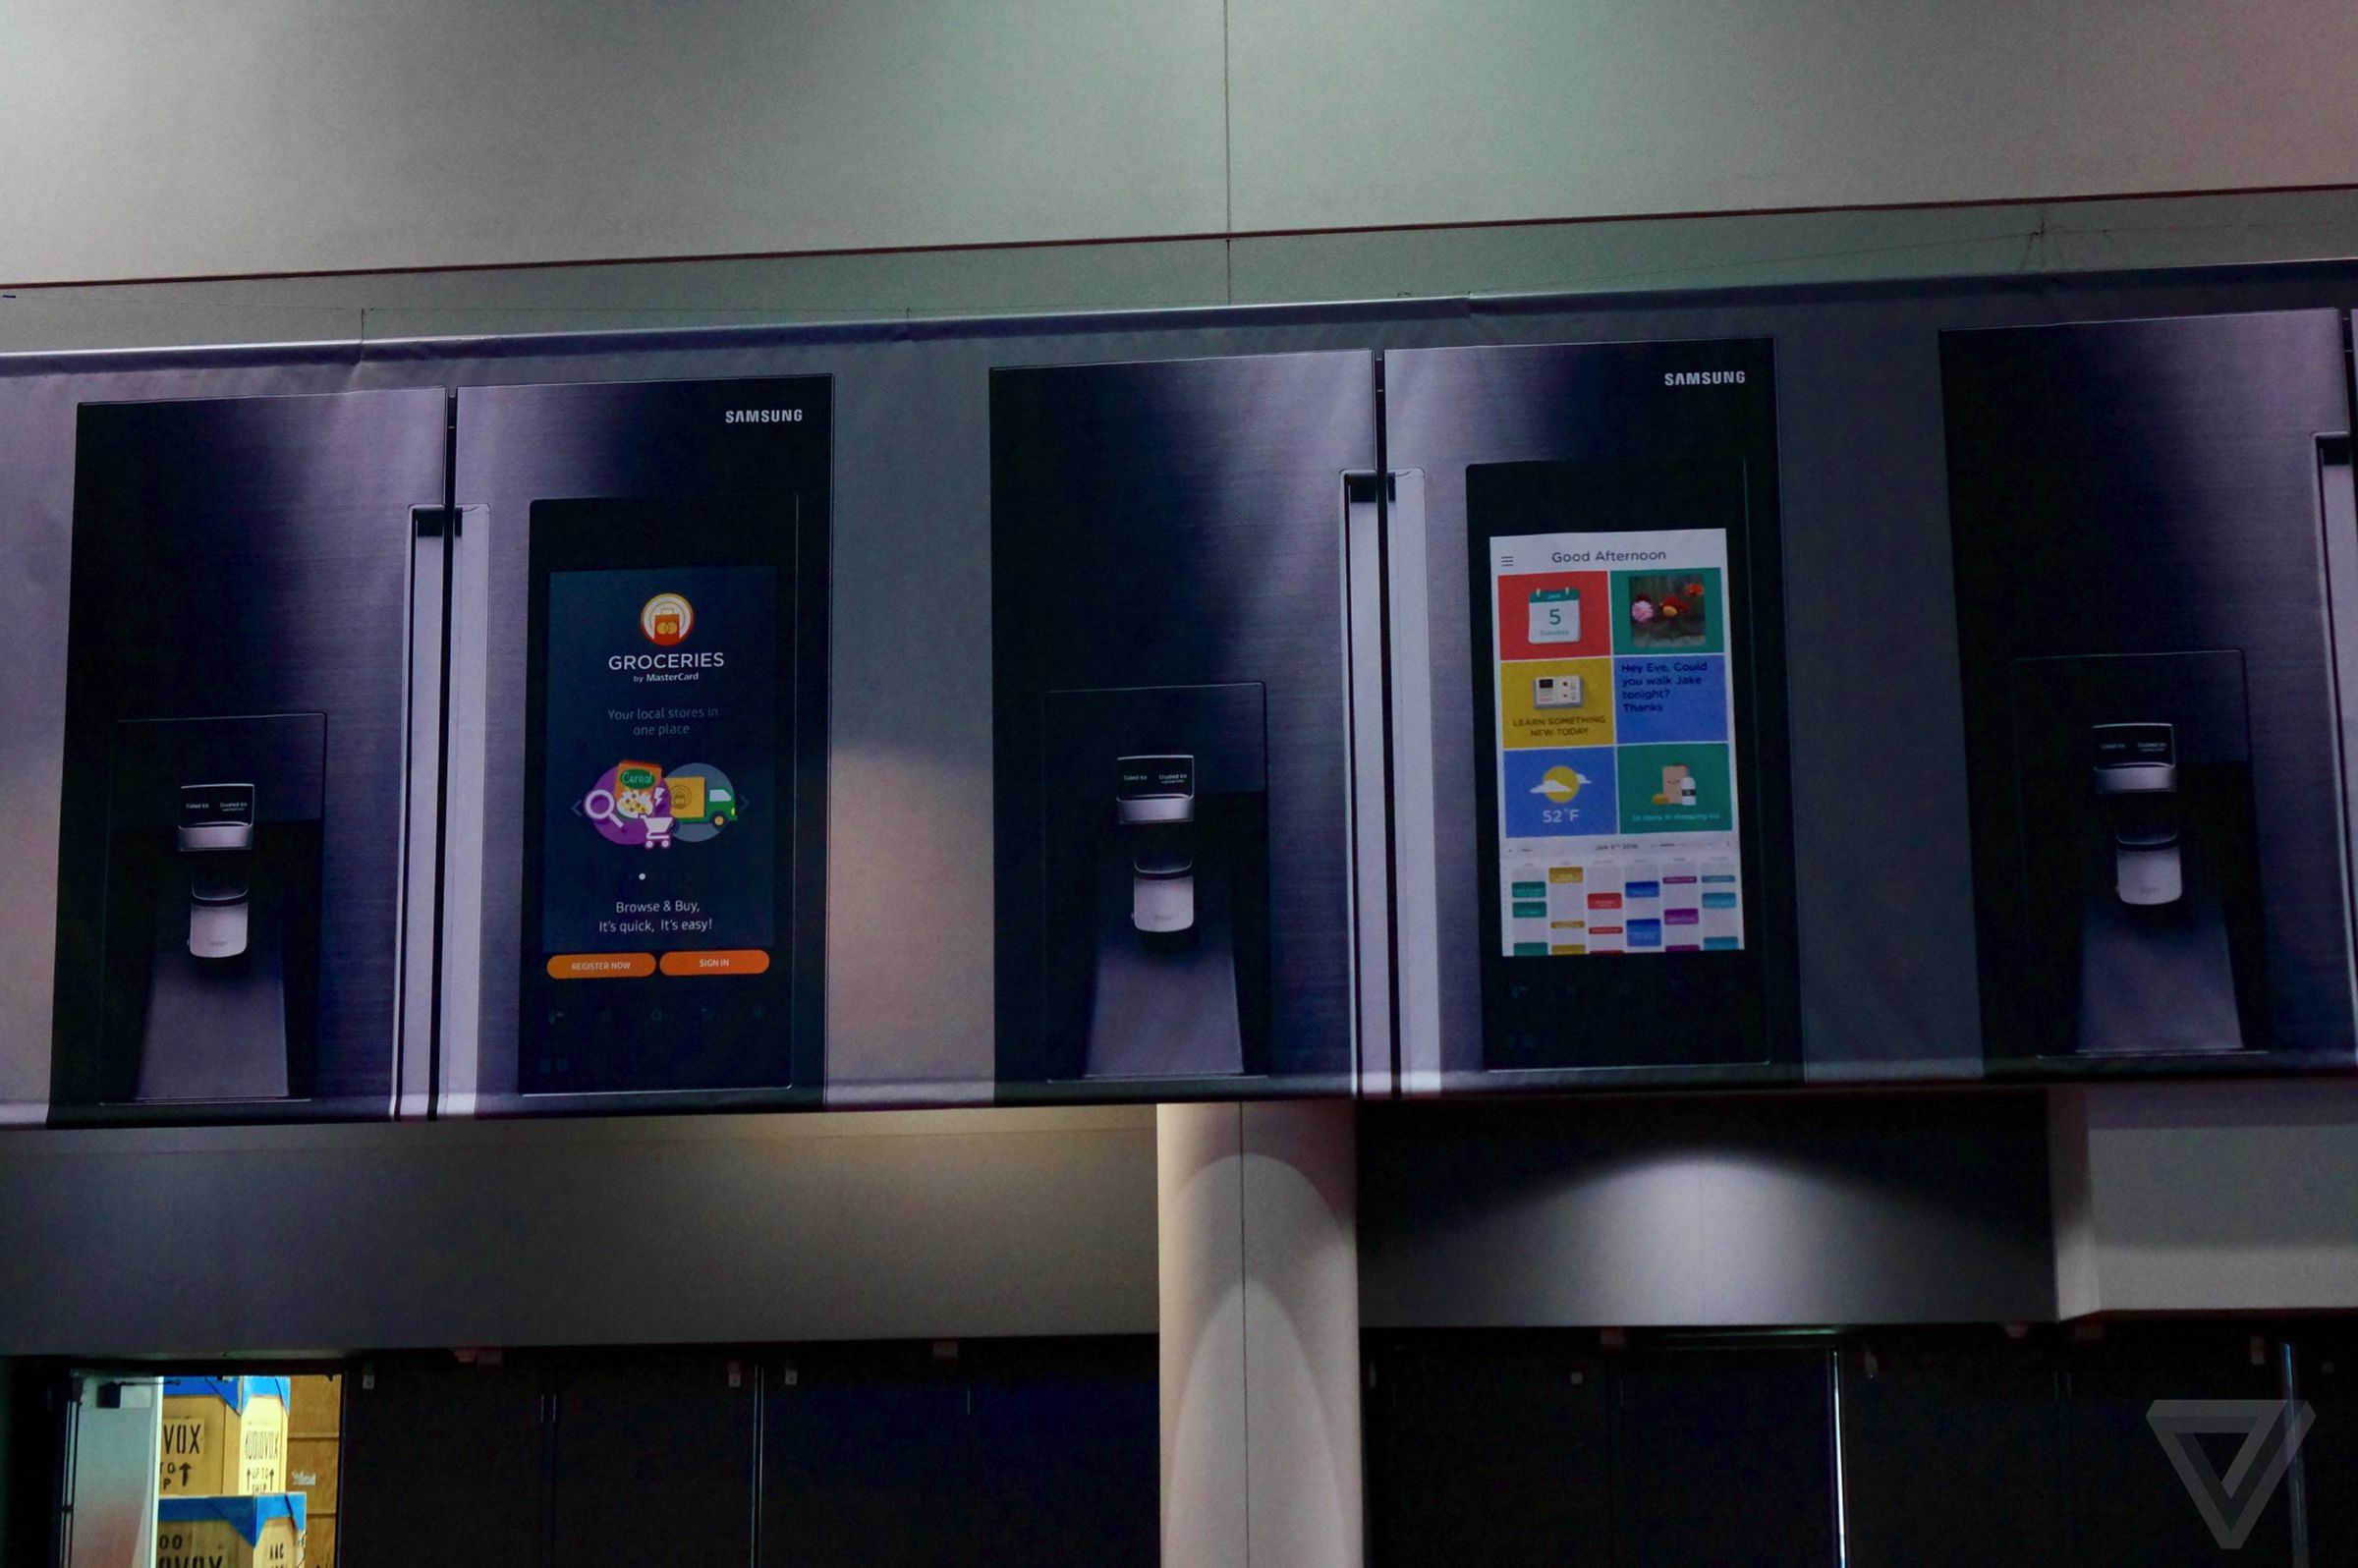 Pictures of Samsung's smart fridge with a massive touchscreen